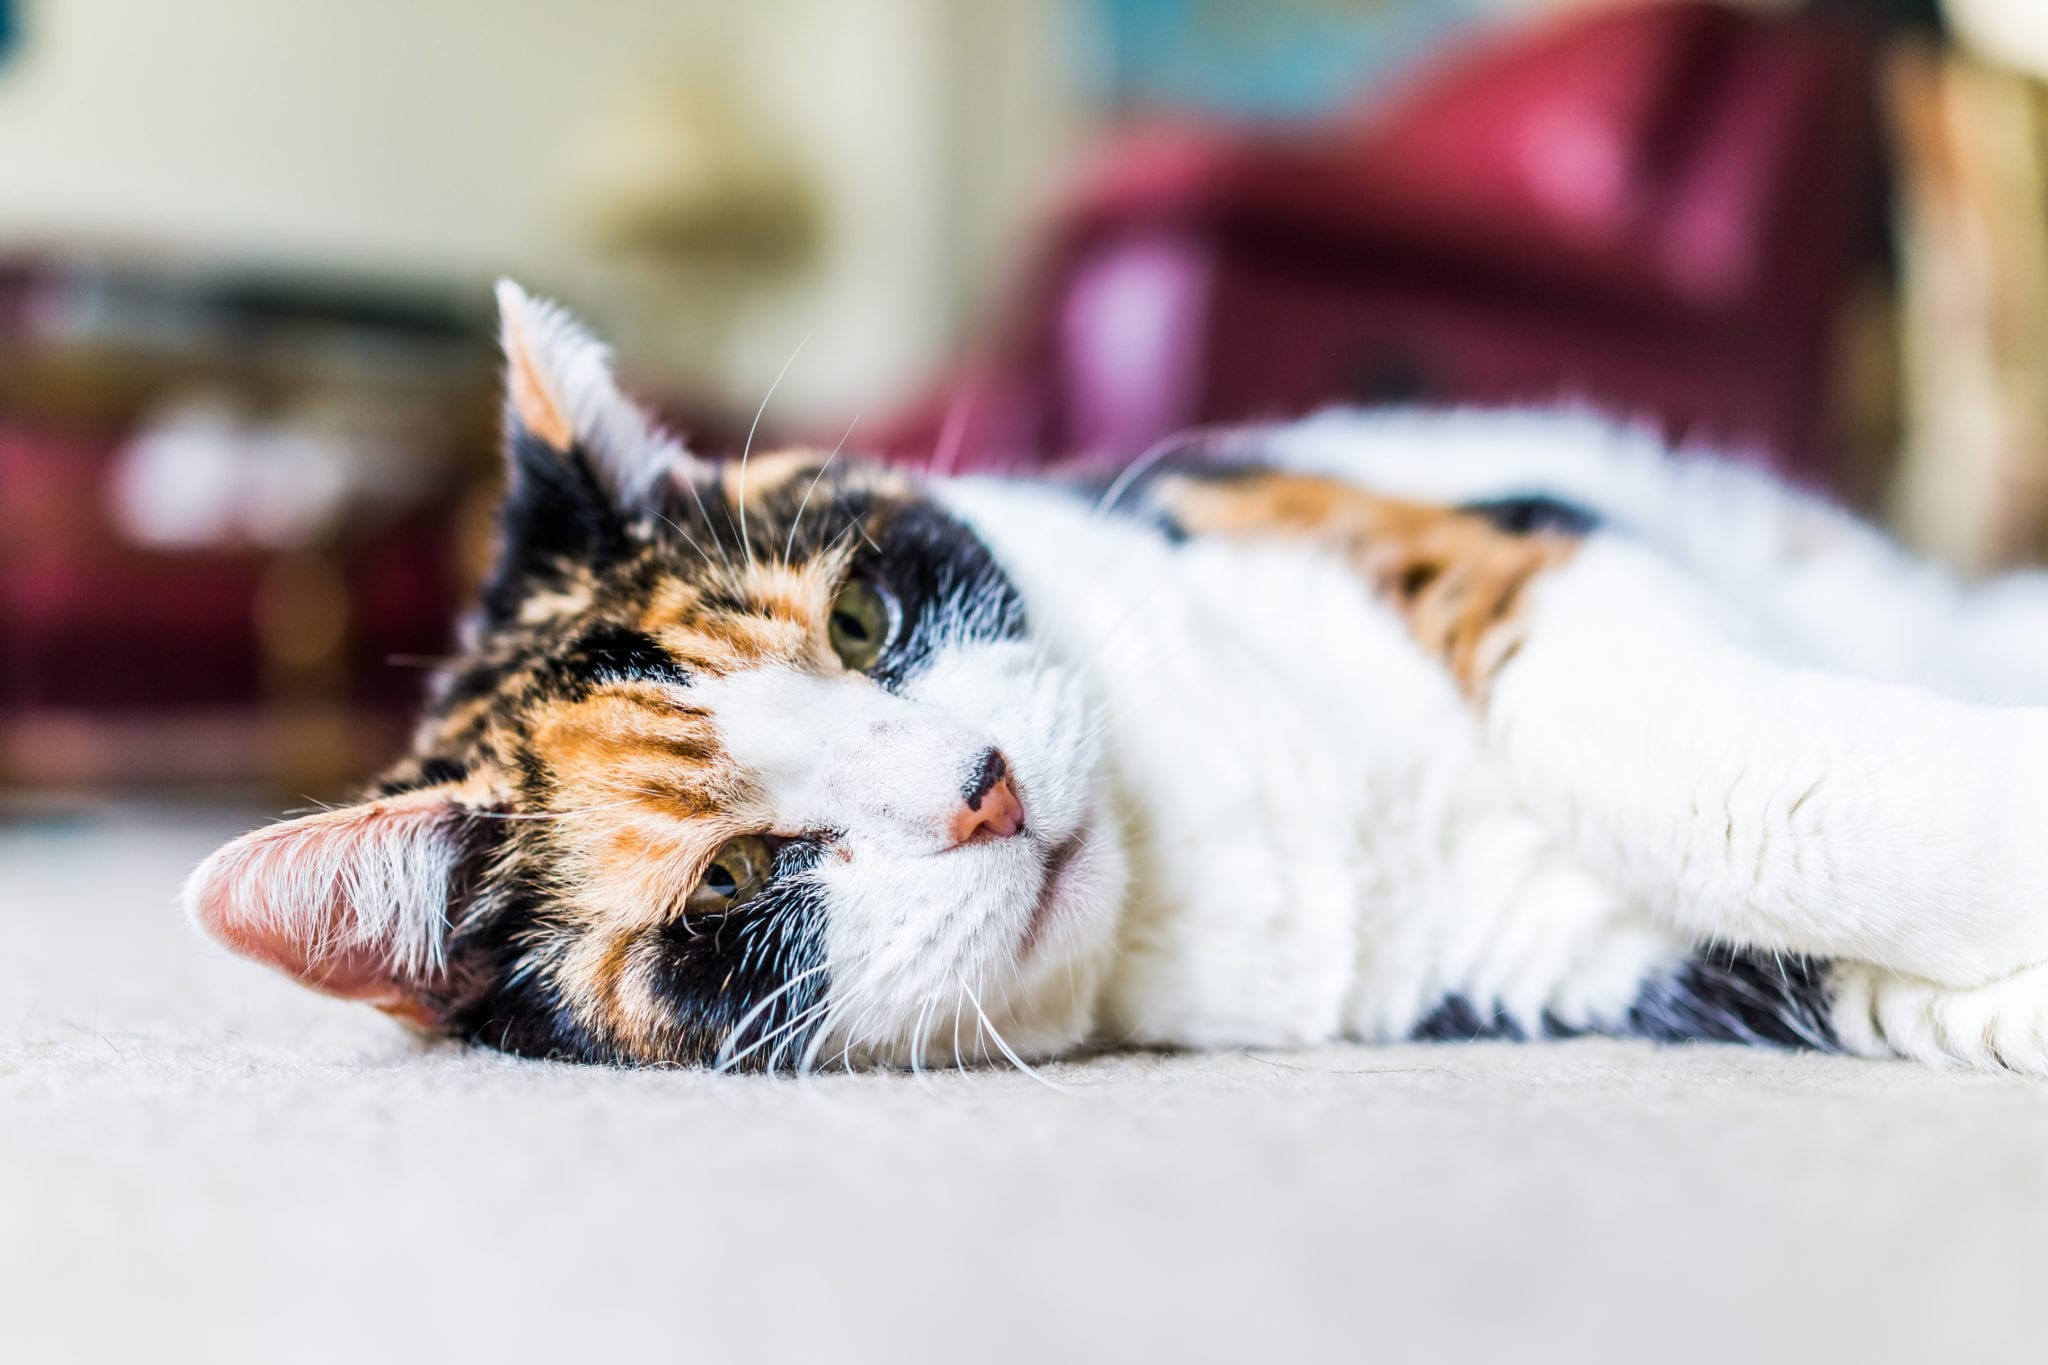 Closeup of calico cat face looking sad lying down on carpet sleepy in home living room